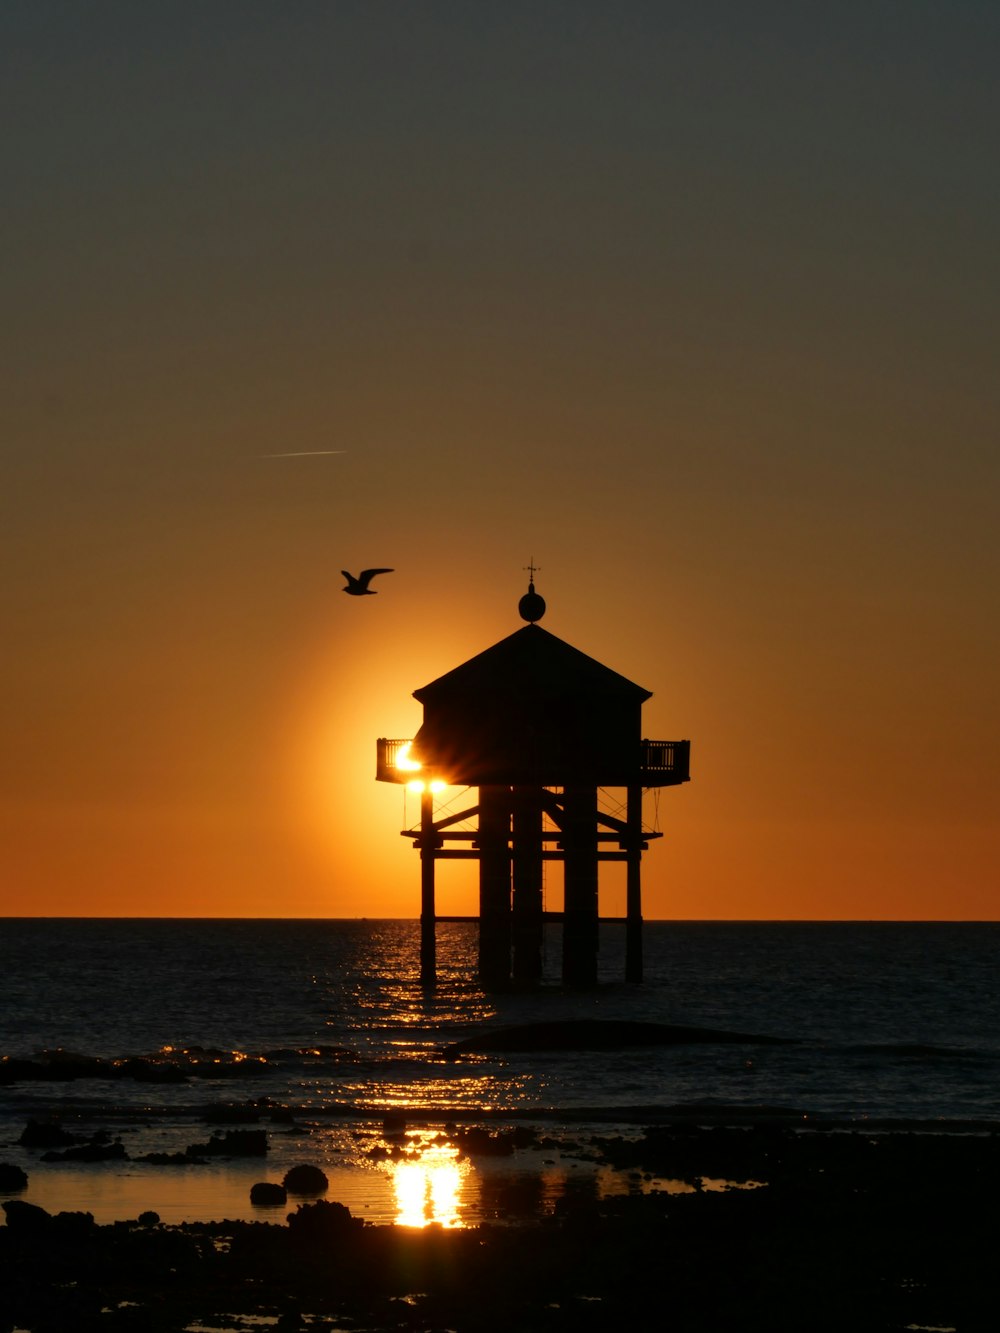 a bird flying over a pier at sunset